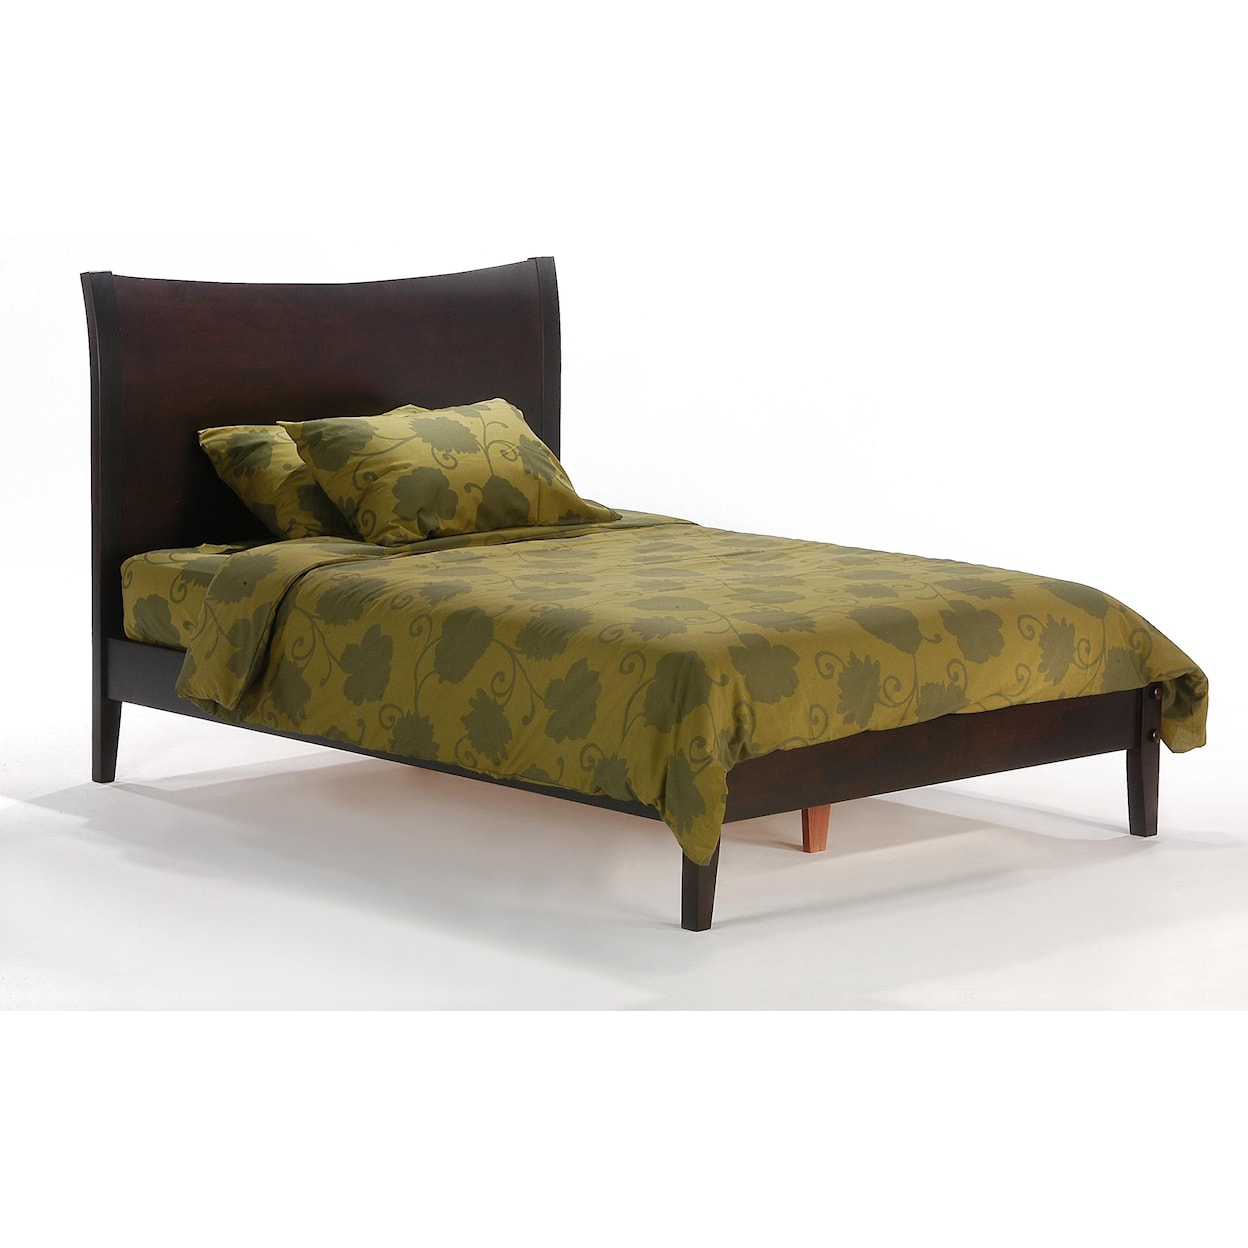 Pacific Manufacturing Blackpepper - Chocolate King Bed